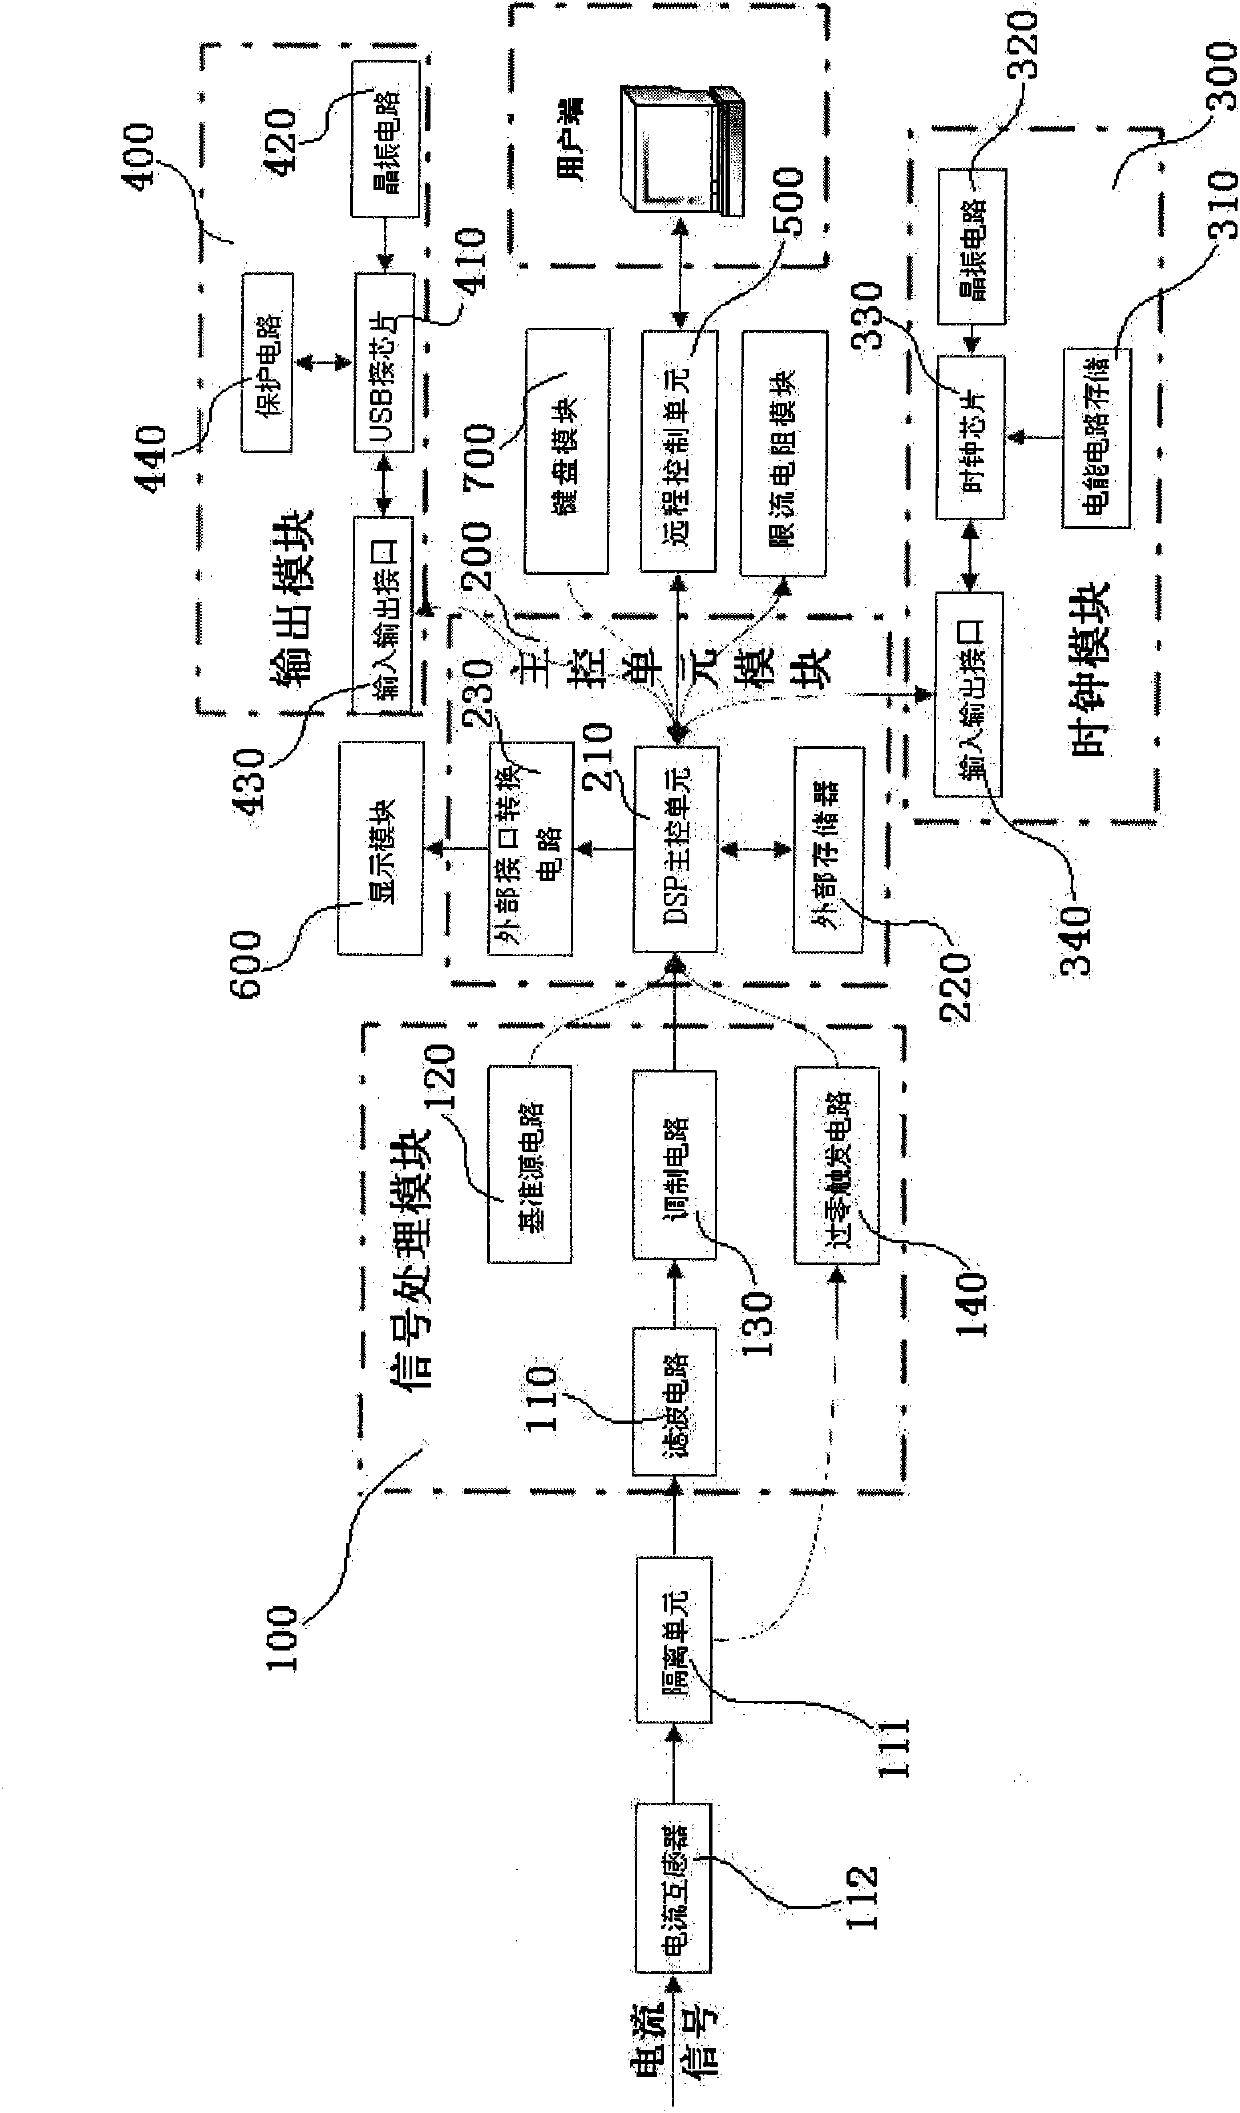 System and implementation method for monitoring grounding current of transformer core on line